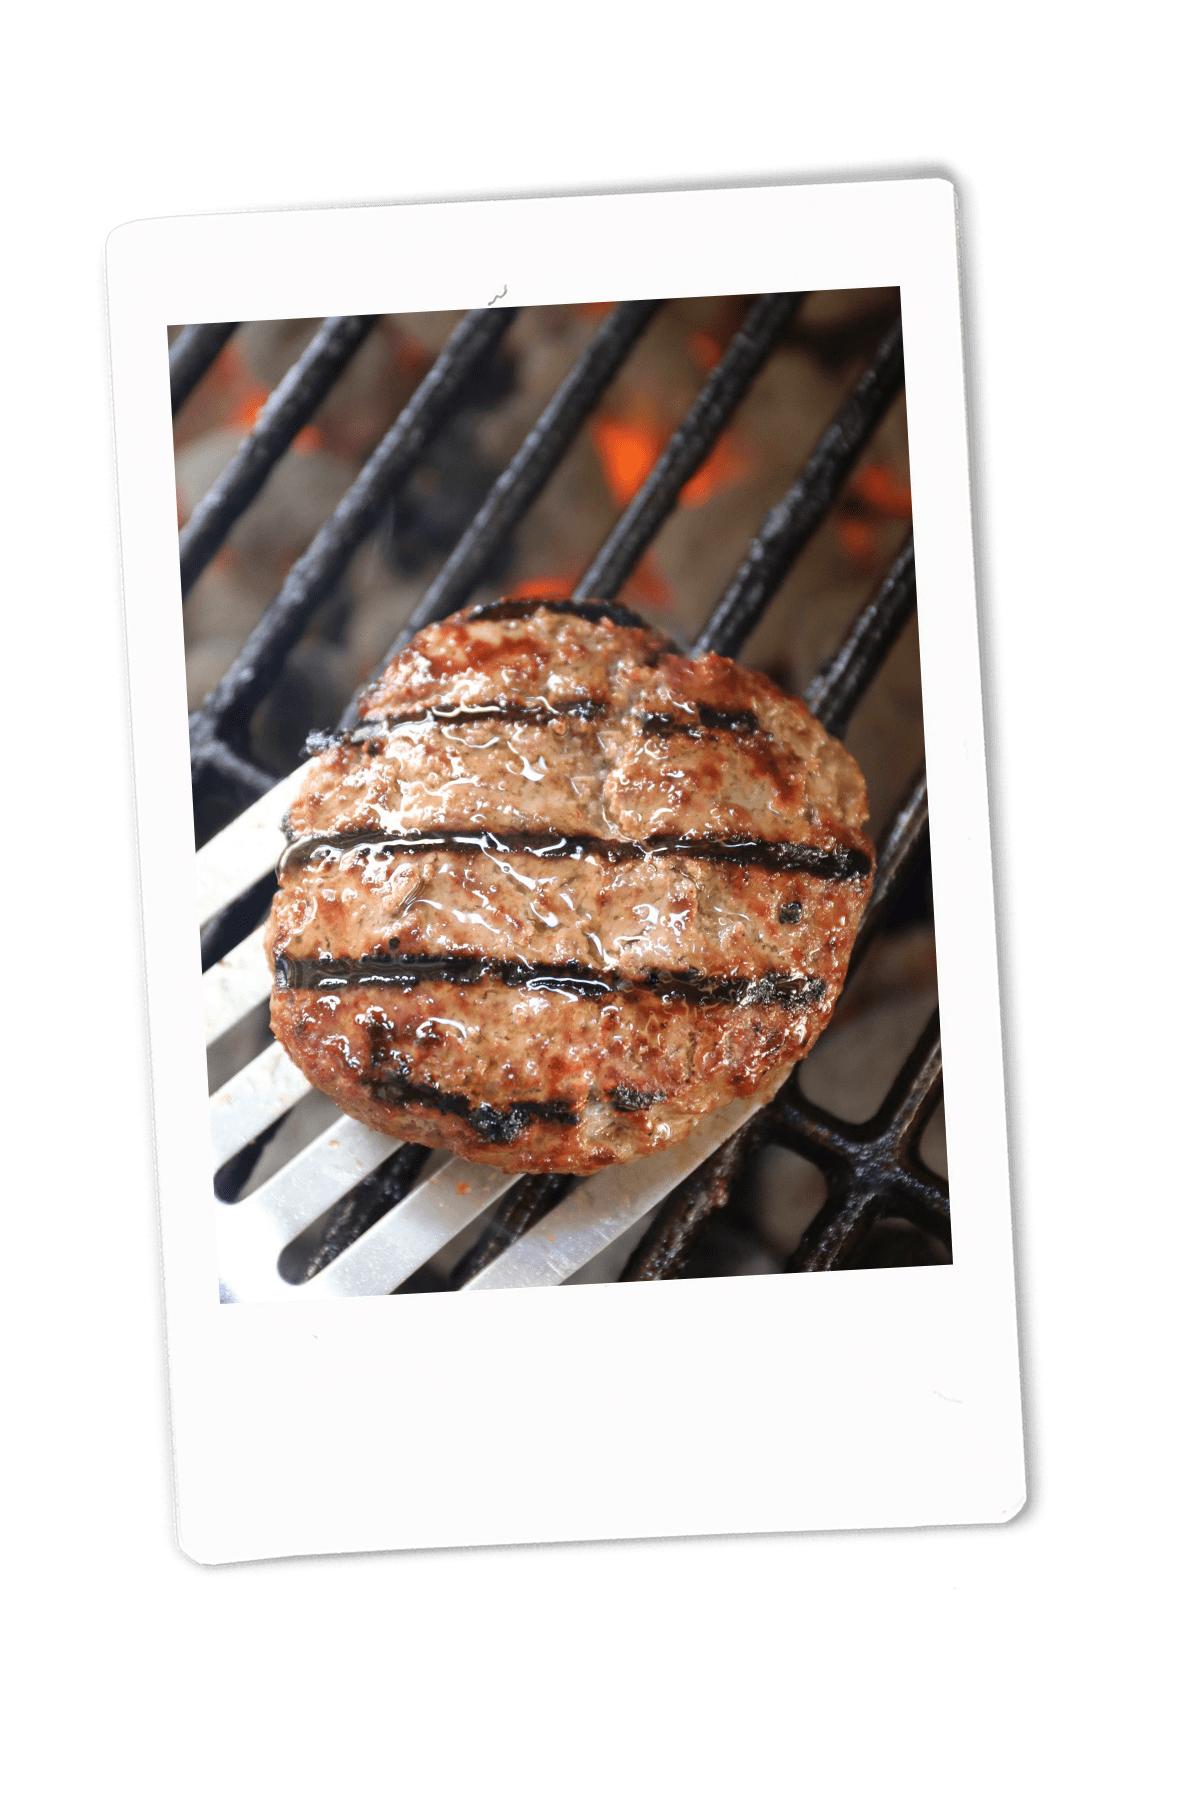 Perfectly Grilled Burger with Chipotle Aioli